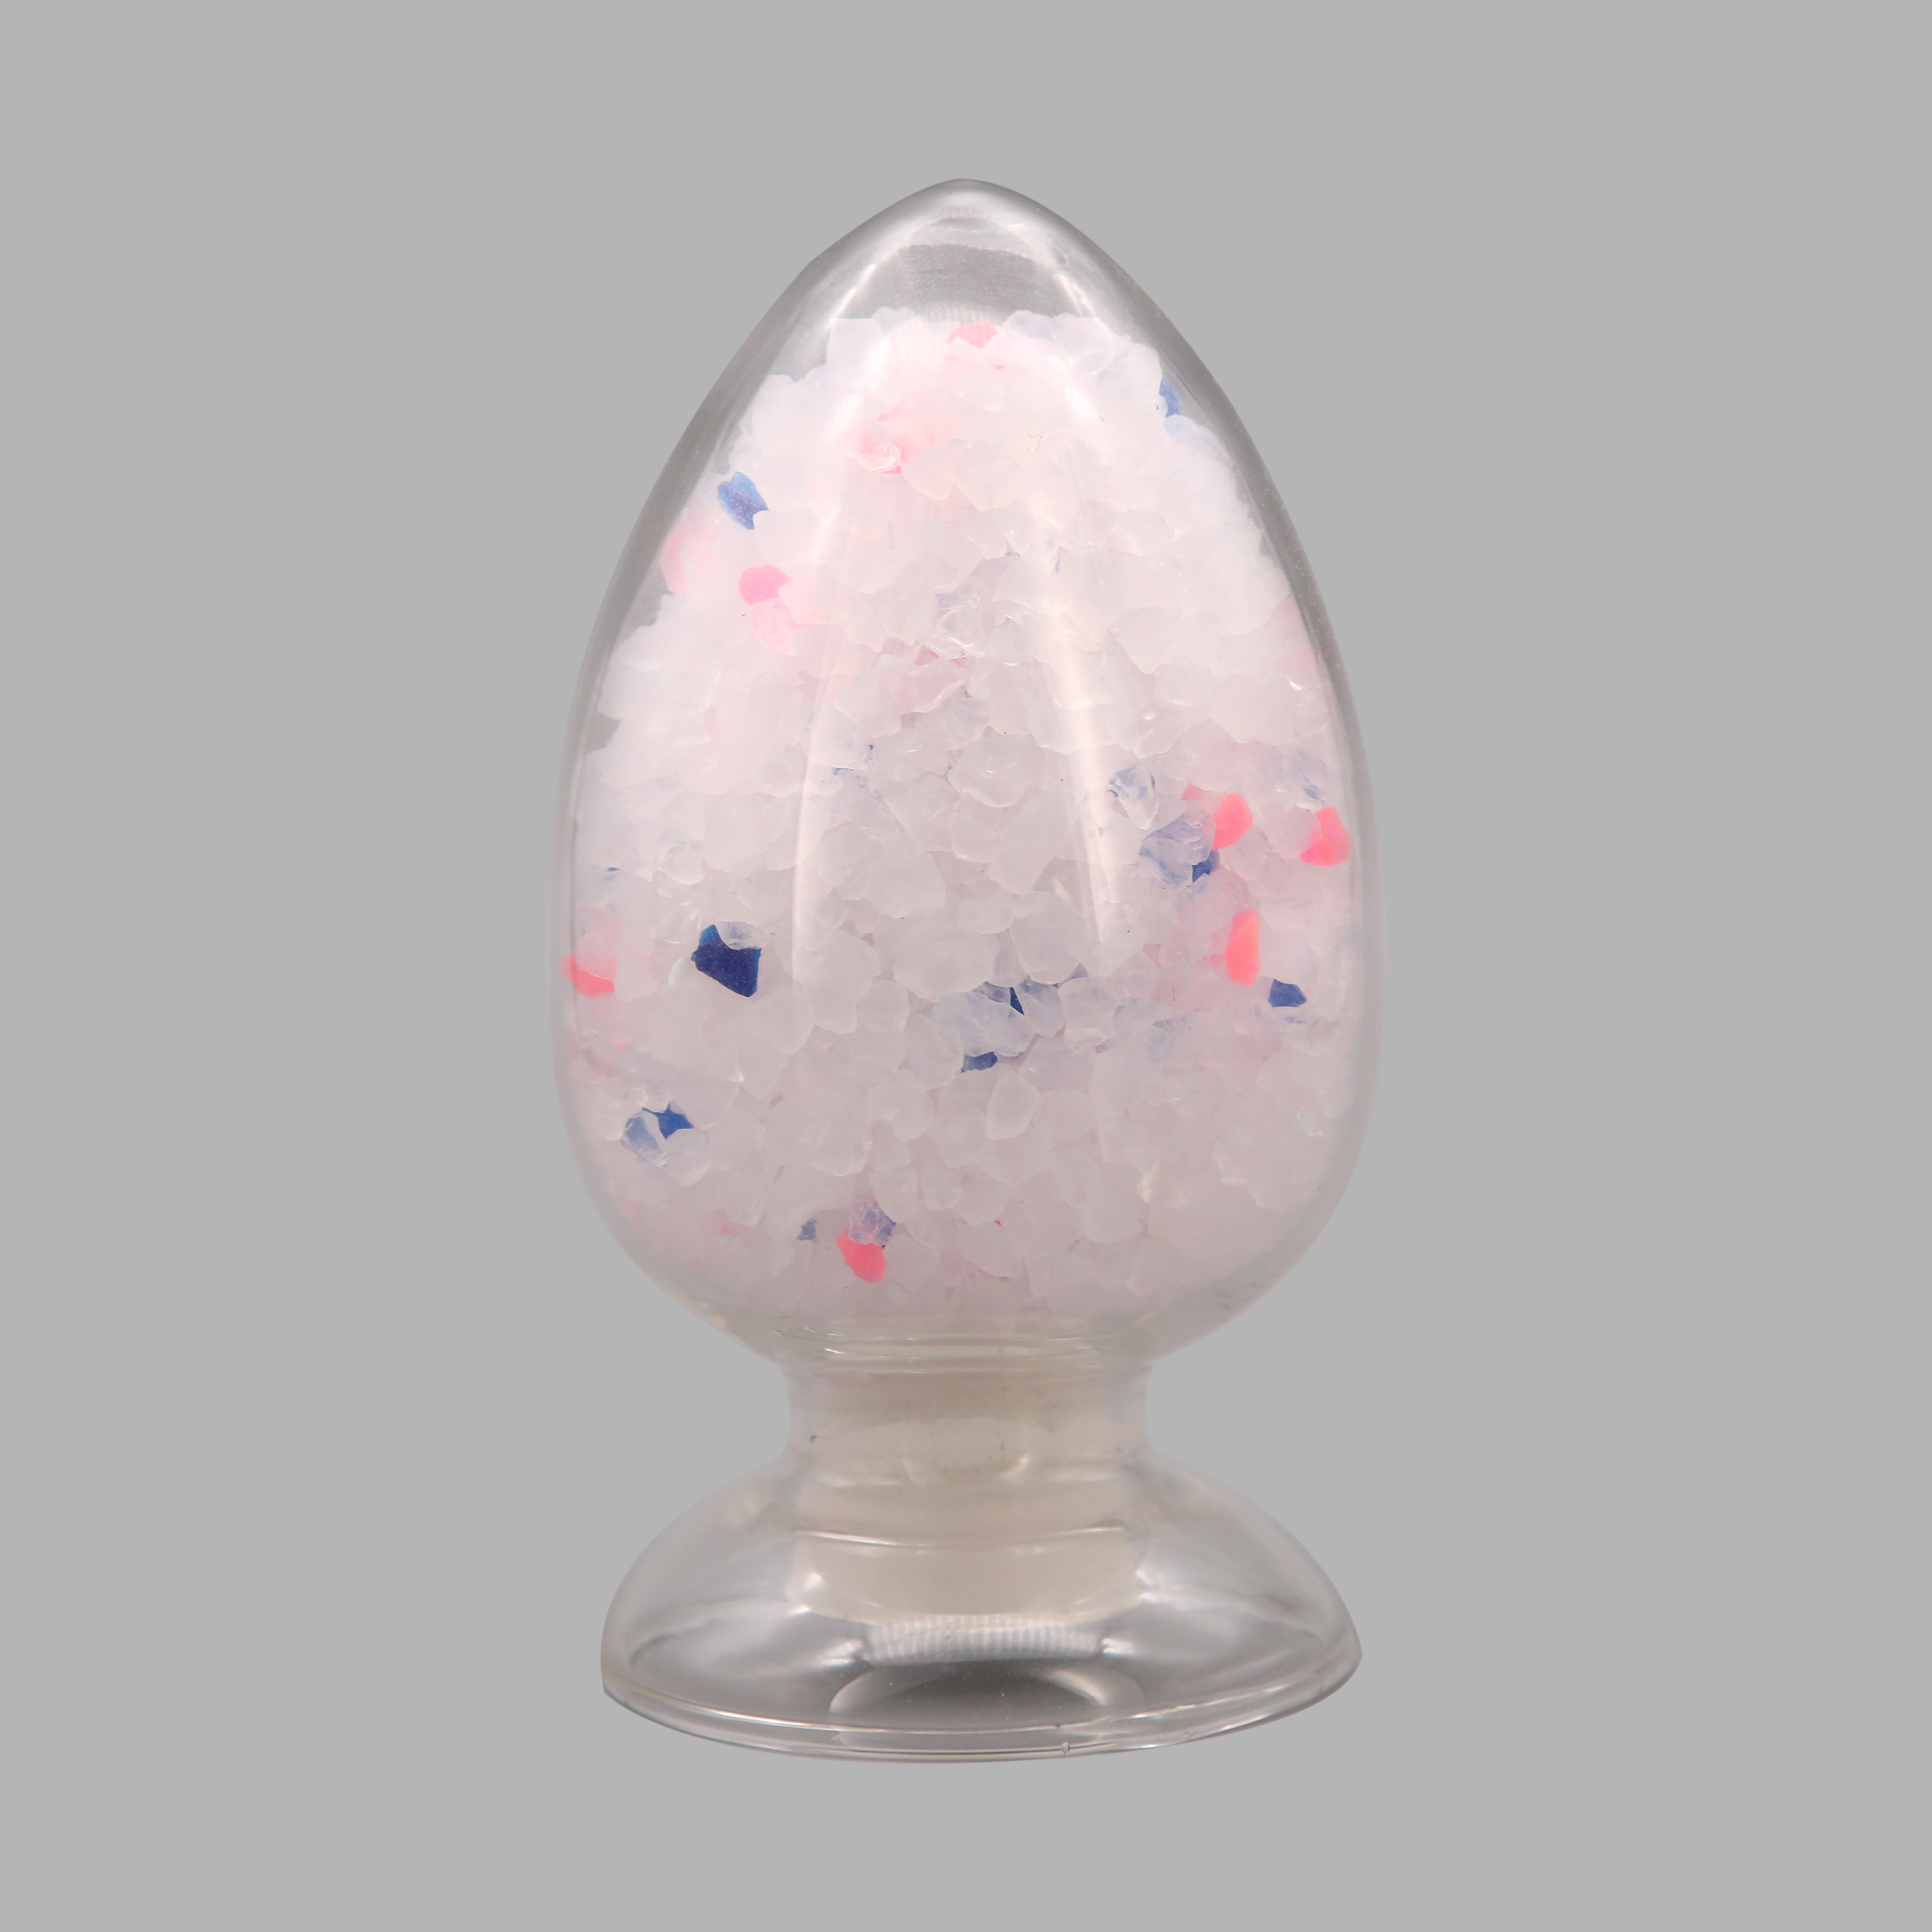 Silica gel cat litter+blue and pink